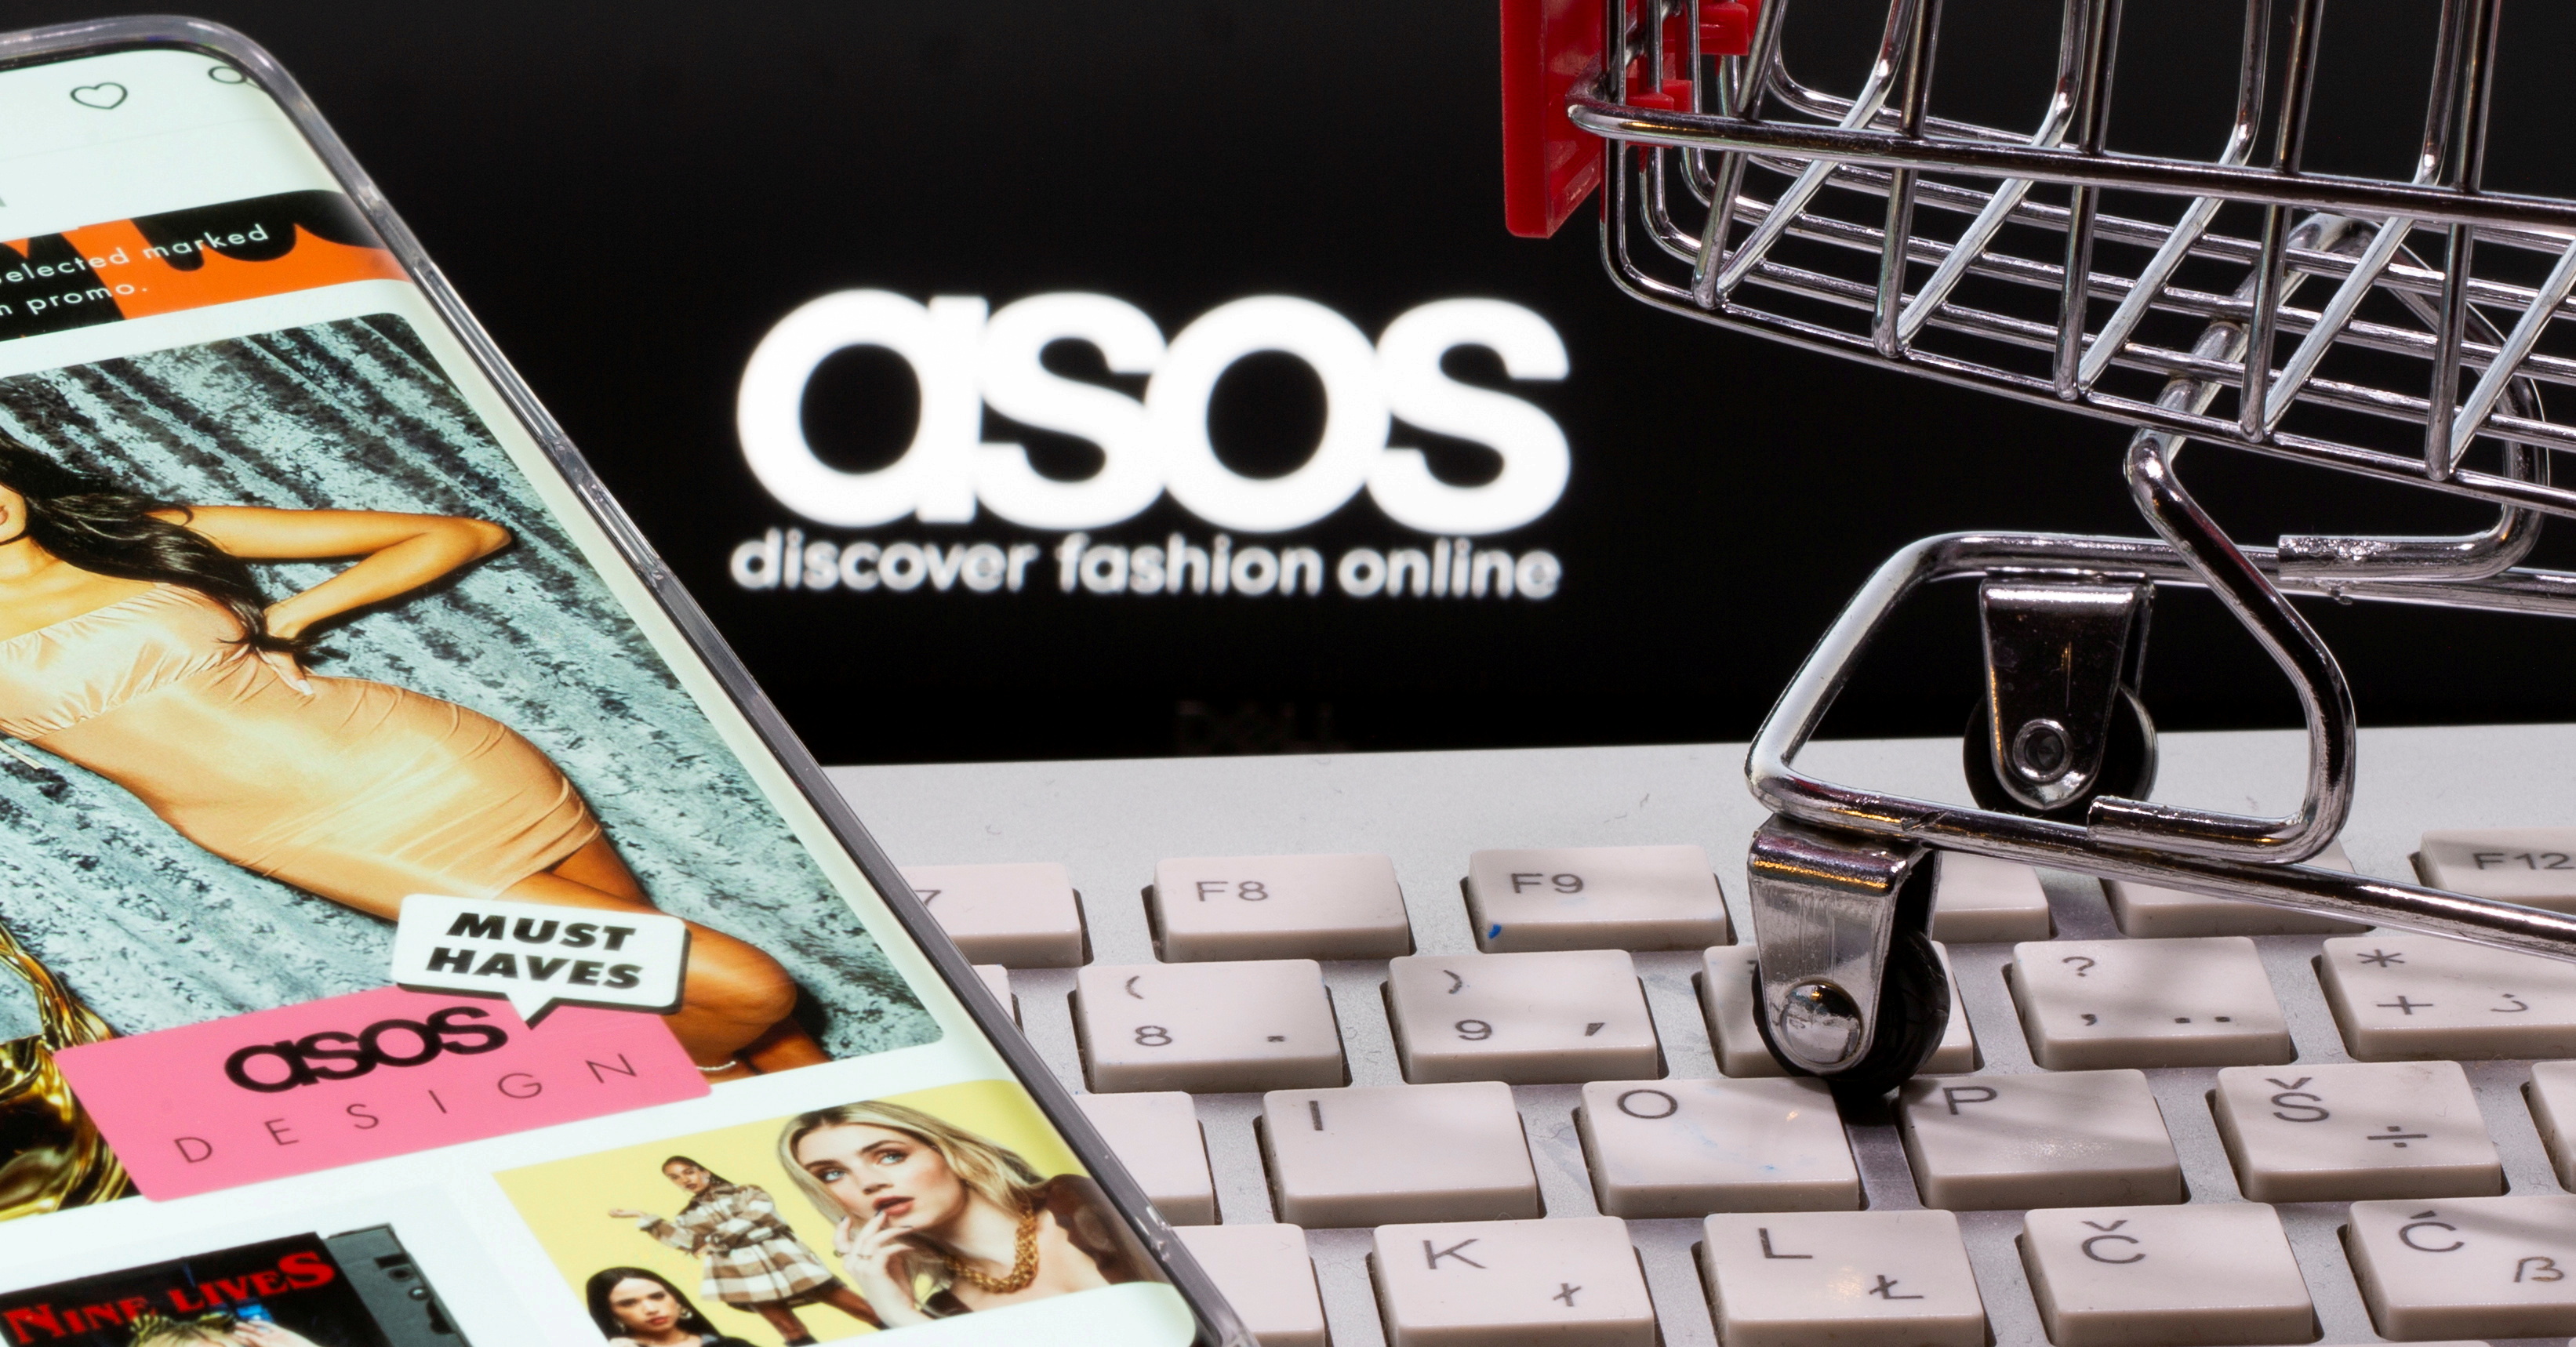 FILE PHOTO: A smartphone with the ASOS app and a keyboard and shopping cart are seen in front of a displayed ASOS logo in this illustration picture